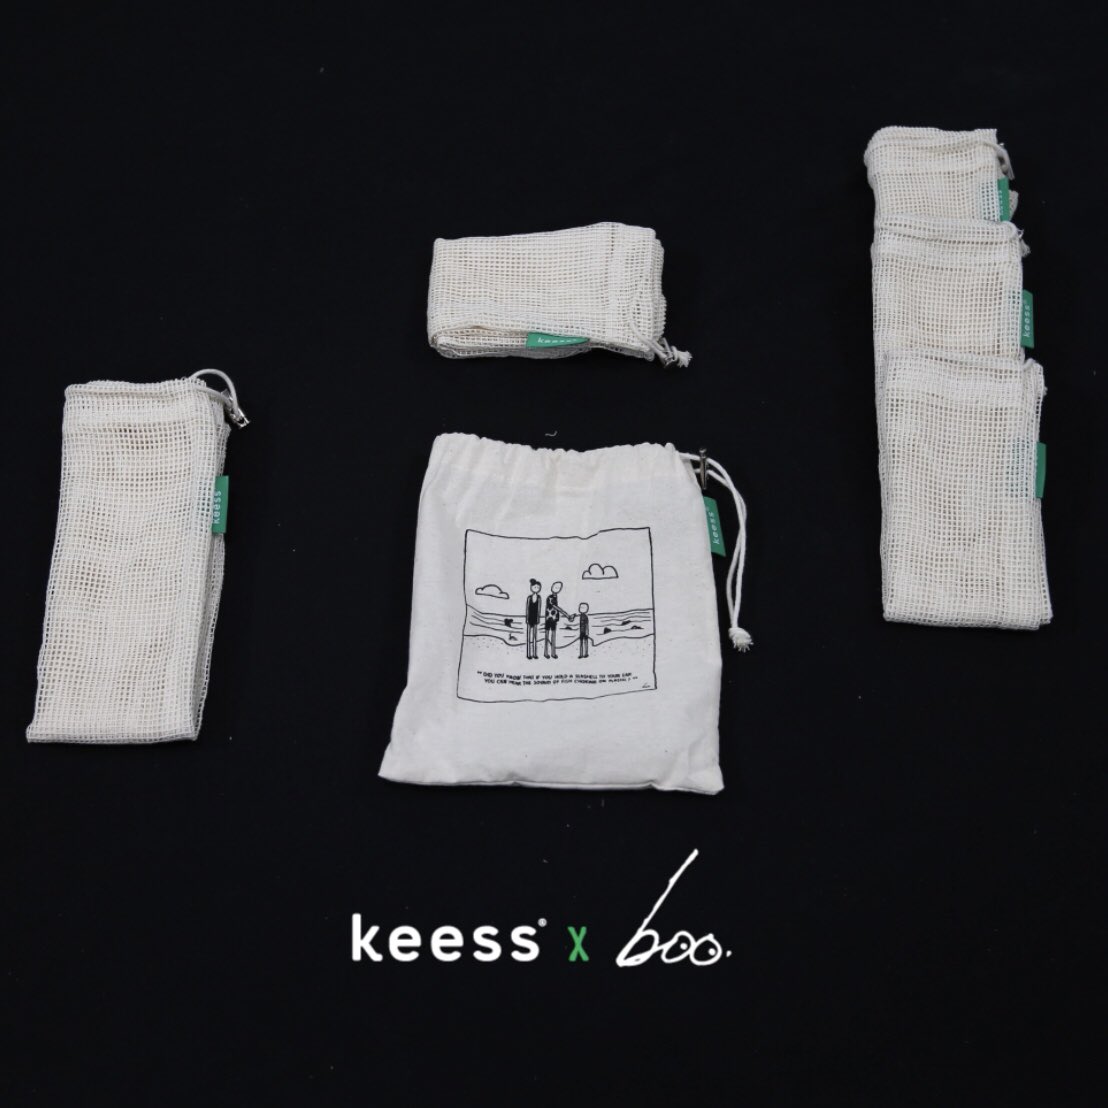 My collaboration with Keess for their produce bags edition! Now available on Dikkéni.
#endsingleuseplastic